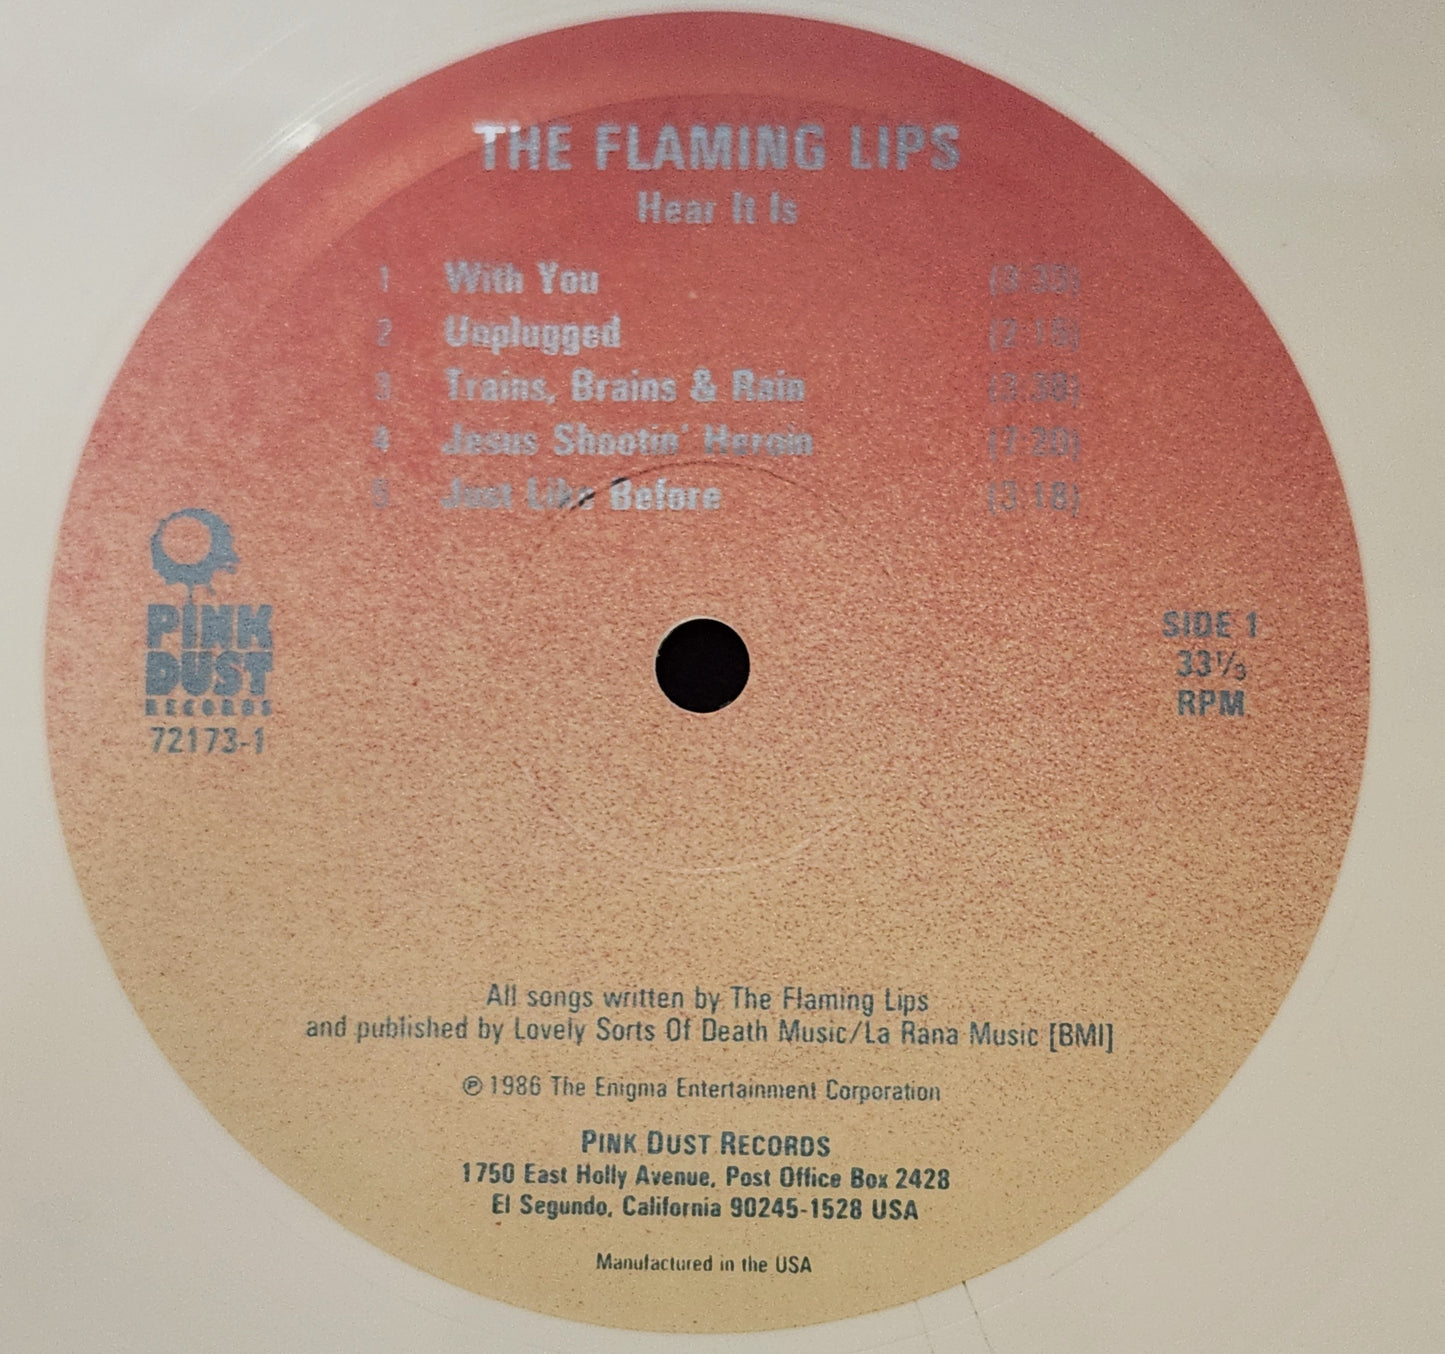 The Flaming Lips "Hear It Is" 1986 Limited Ed. White Vinyl Indie Rock Record Album